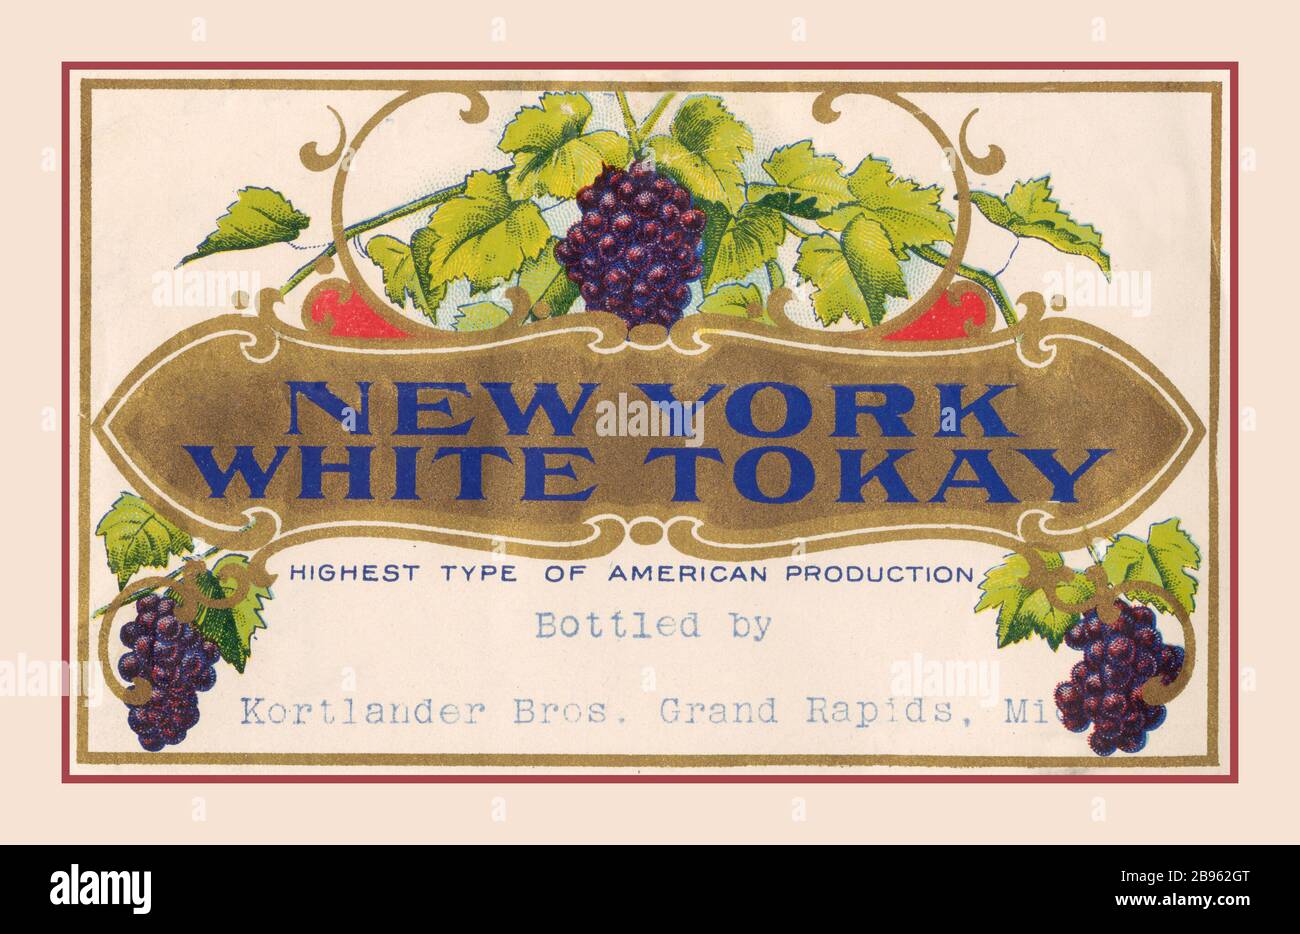 WHITE TOKAY New York White Tokay ornate wine label Archive Date: ca. 1900-1925 Song of the Vine: A History of Wine. bottle labels Bottled by Korlander Bros. Grand Rapids Missouri USA Stock Photo